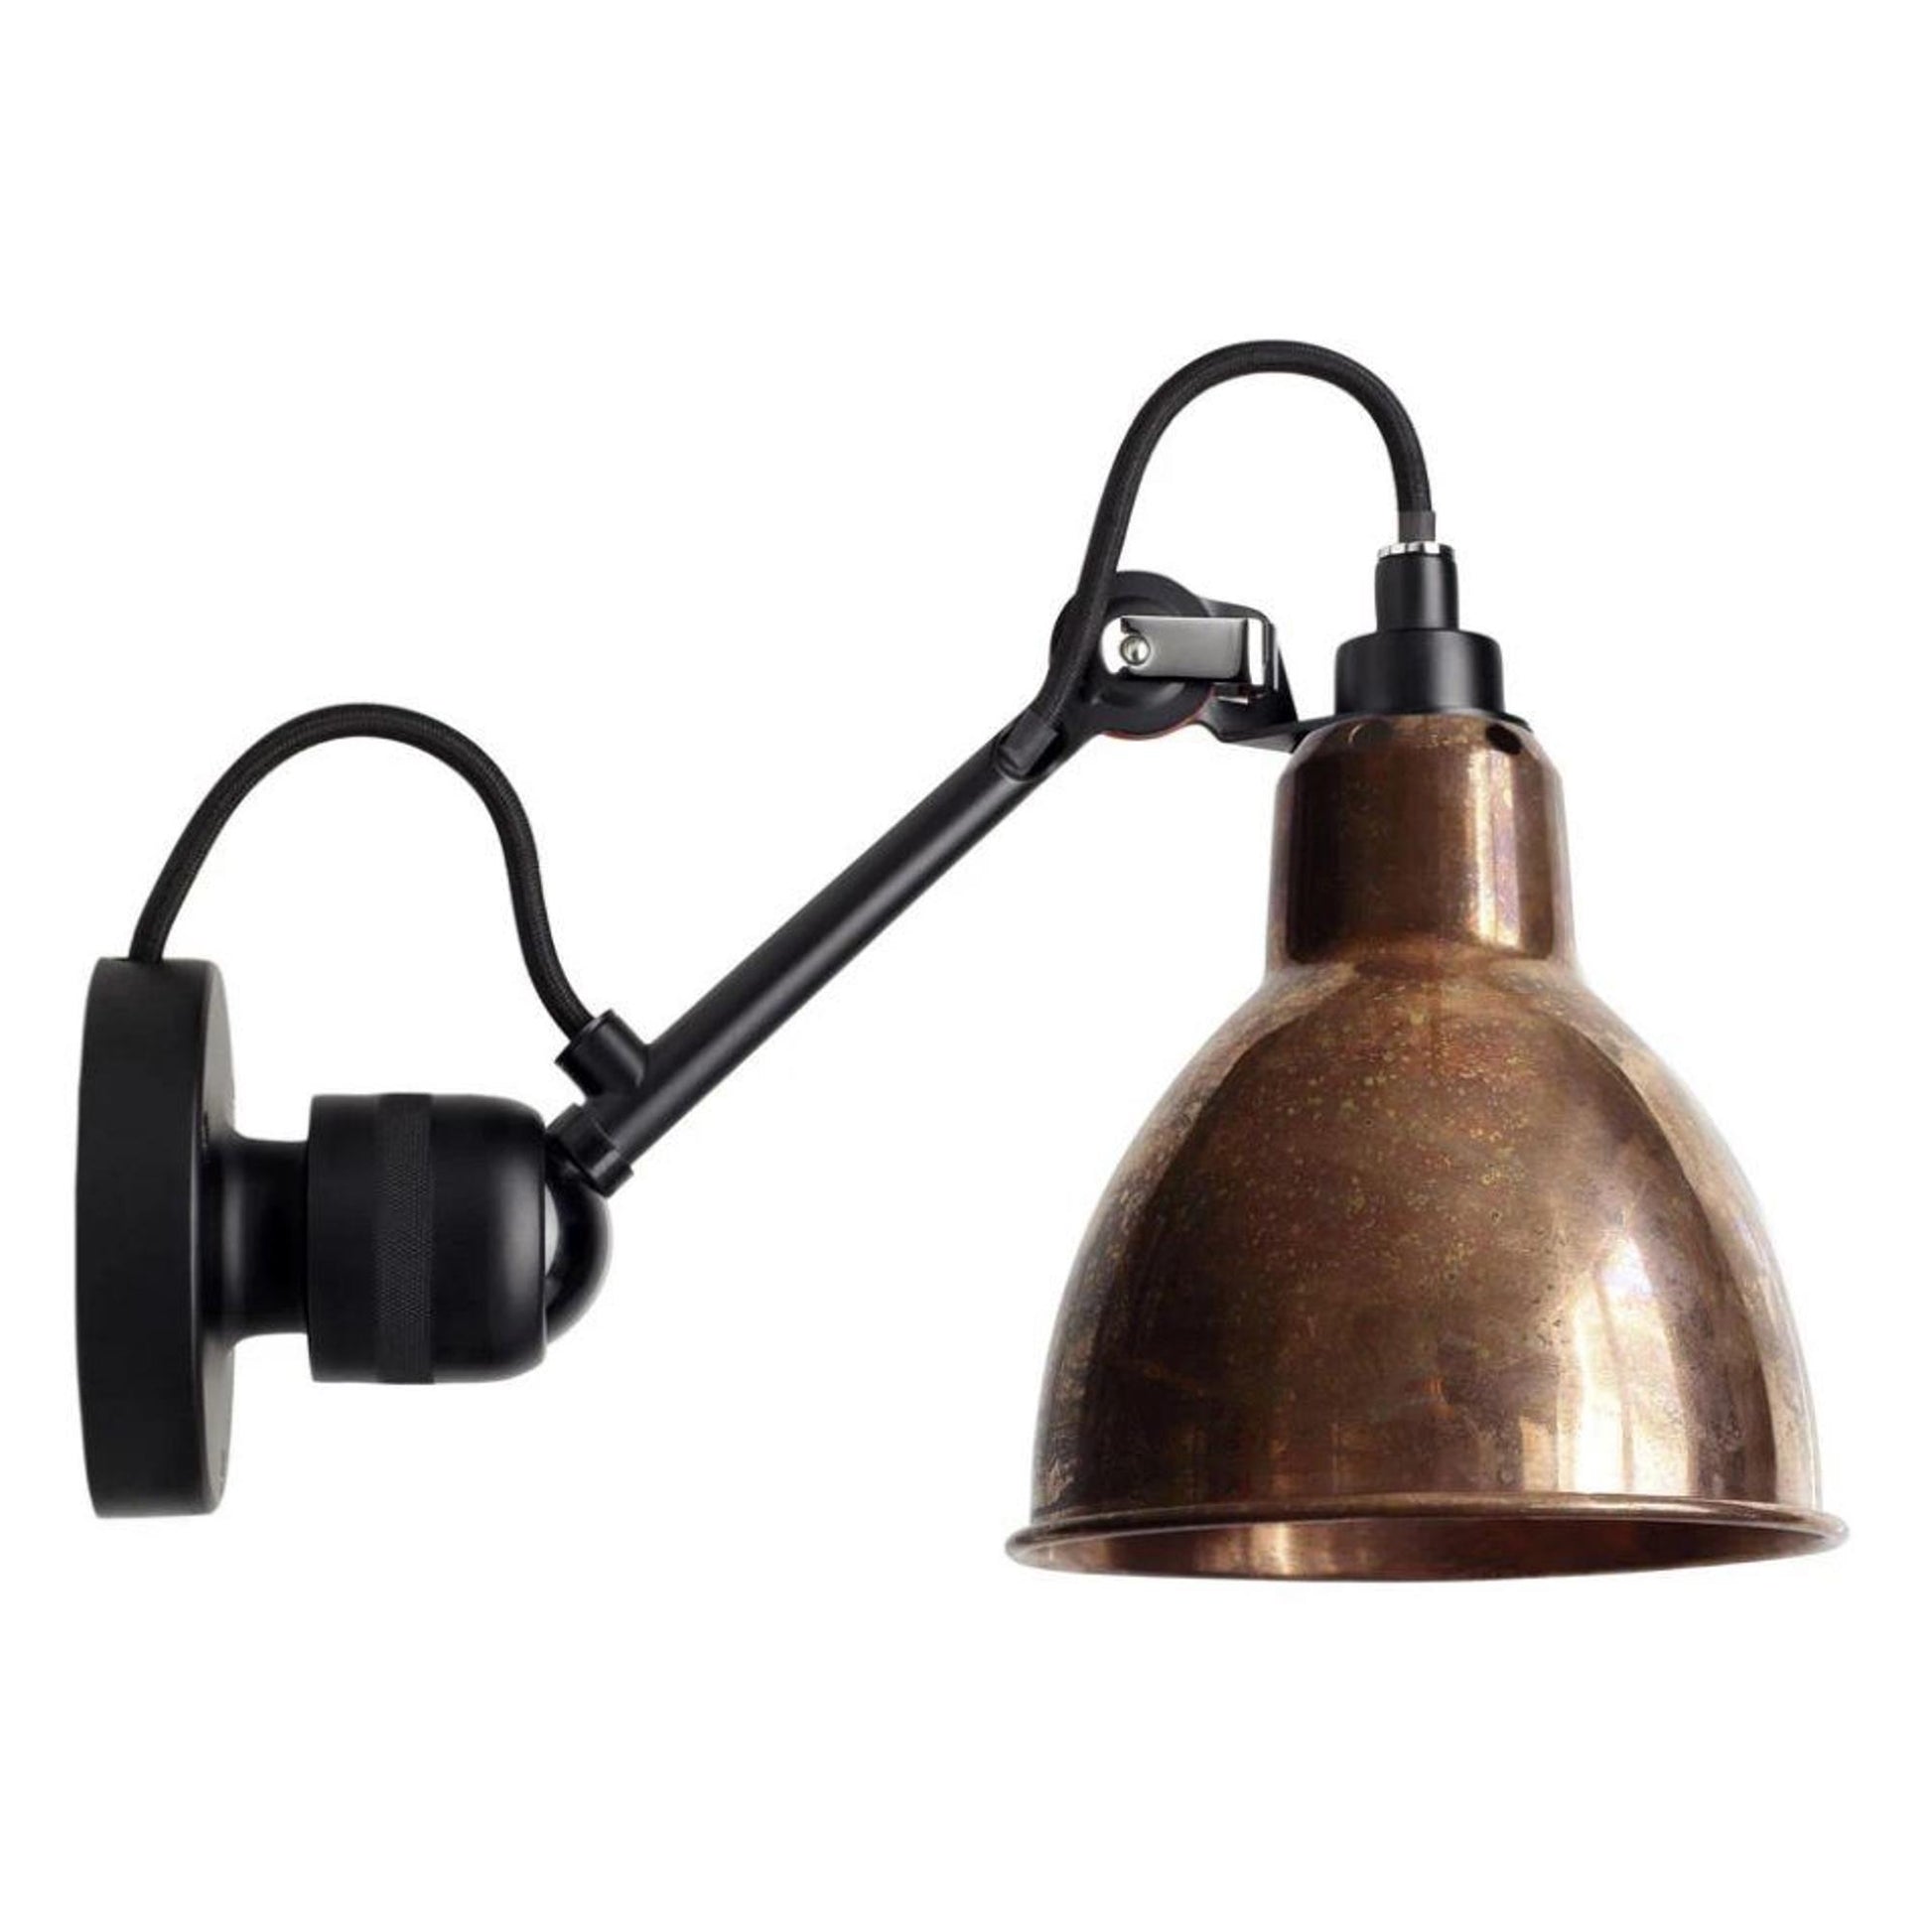 N304 Wall Lamp by Lampe Gras #Matt Black & Raw Copper With Cord